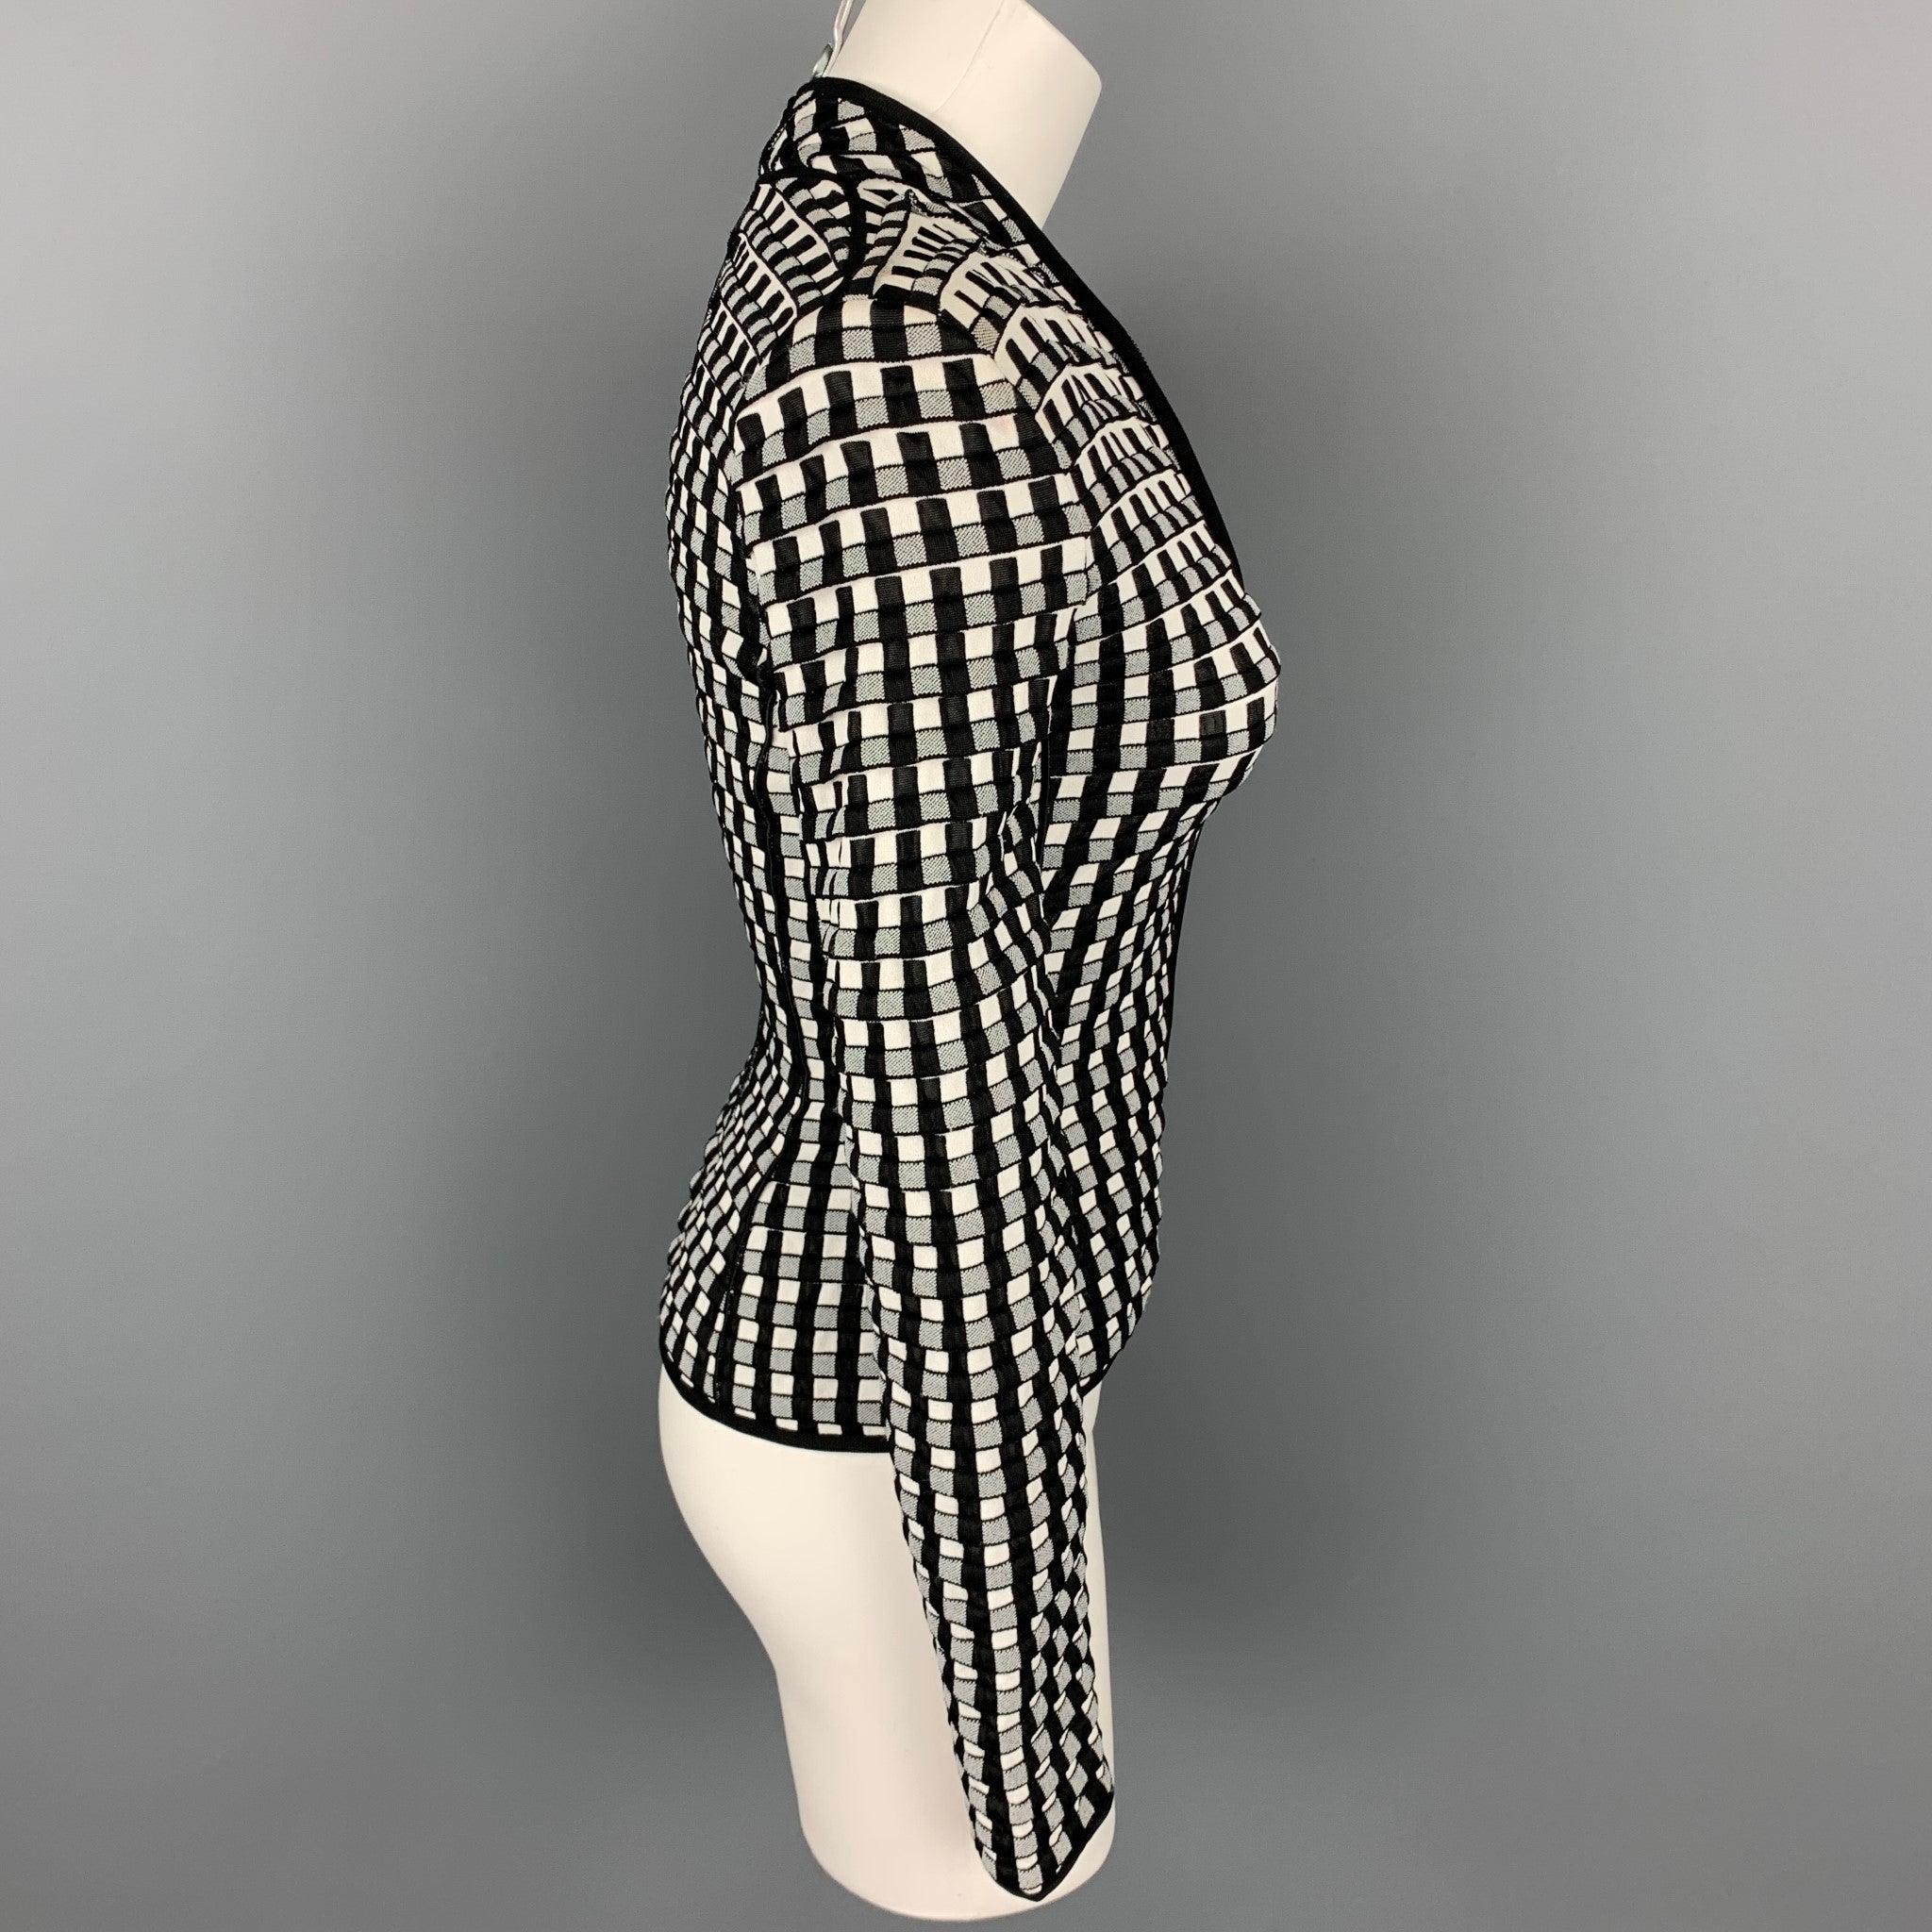 GIORGIO ARMANI jacket comes in a black & white textured viscose blend featuring no collar and a zip up closure. Moderate wear.Good
Pre-Owned Condition. 

Marked:   36 

Measurements: 
 
Shoulder: 15 inches  Bust: 32 inches  Waist: 26 inches 